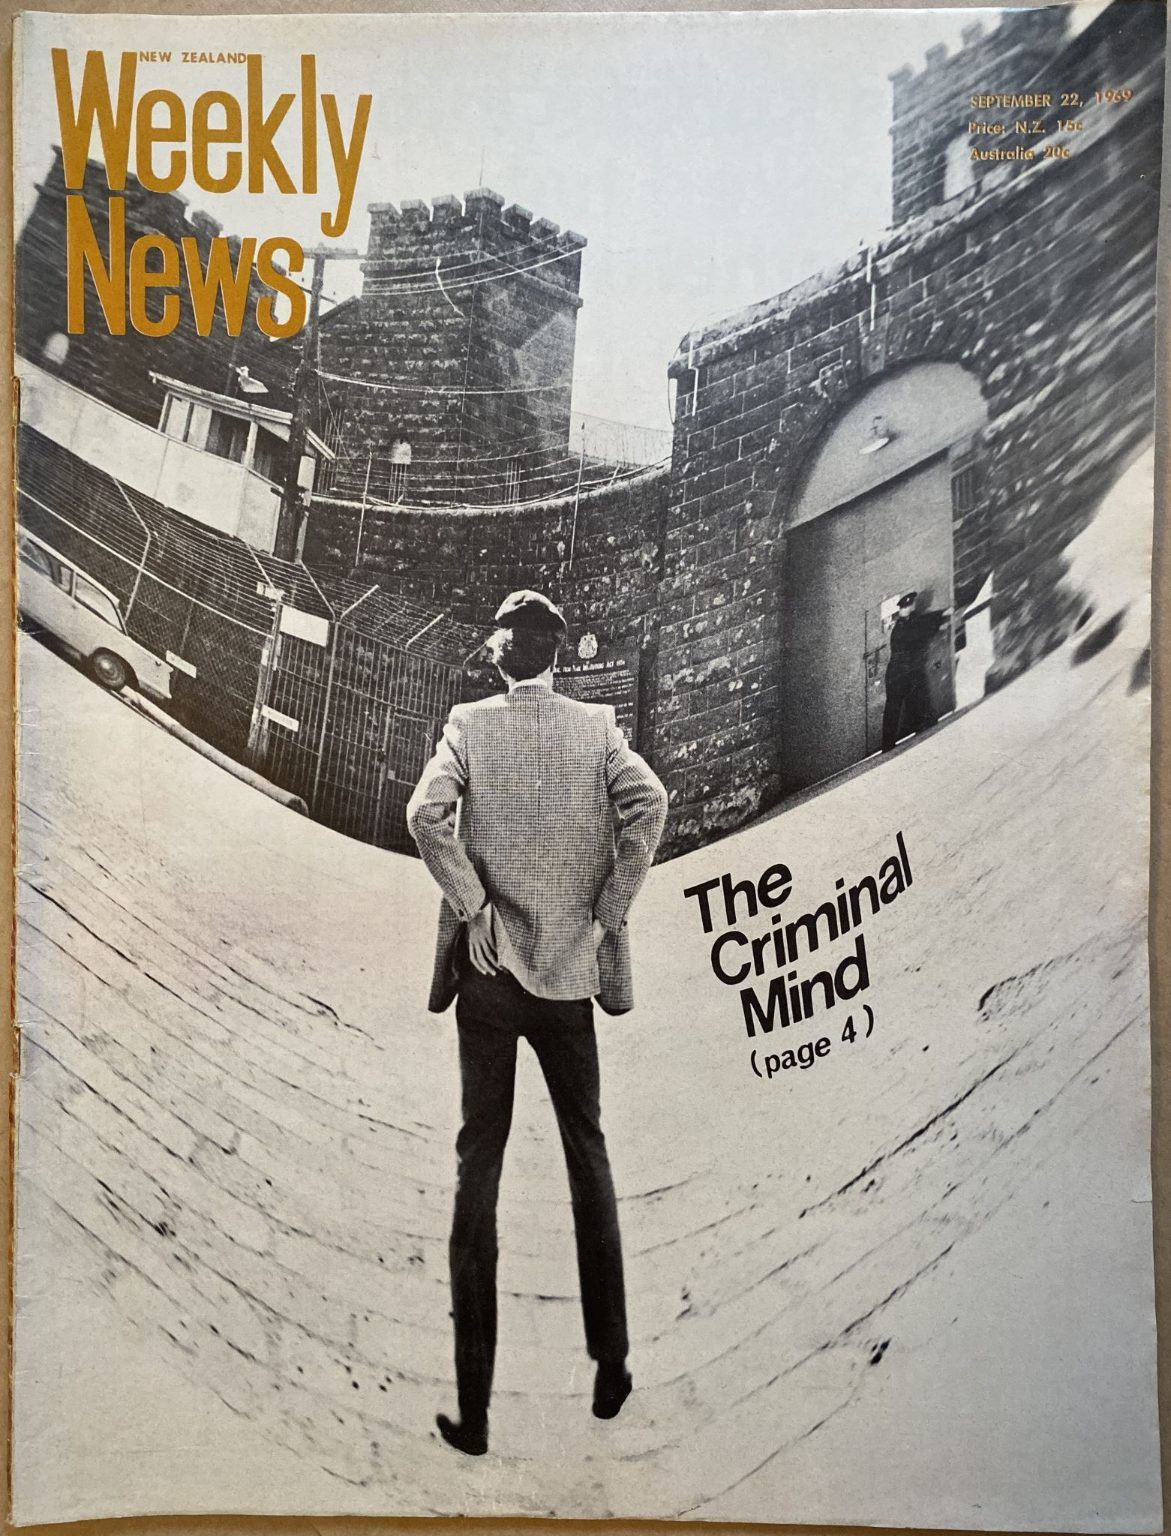 OLD NEWSPAPER: New Zealand Weekly News, No. 5521, 22 September 1969